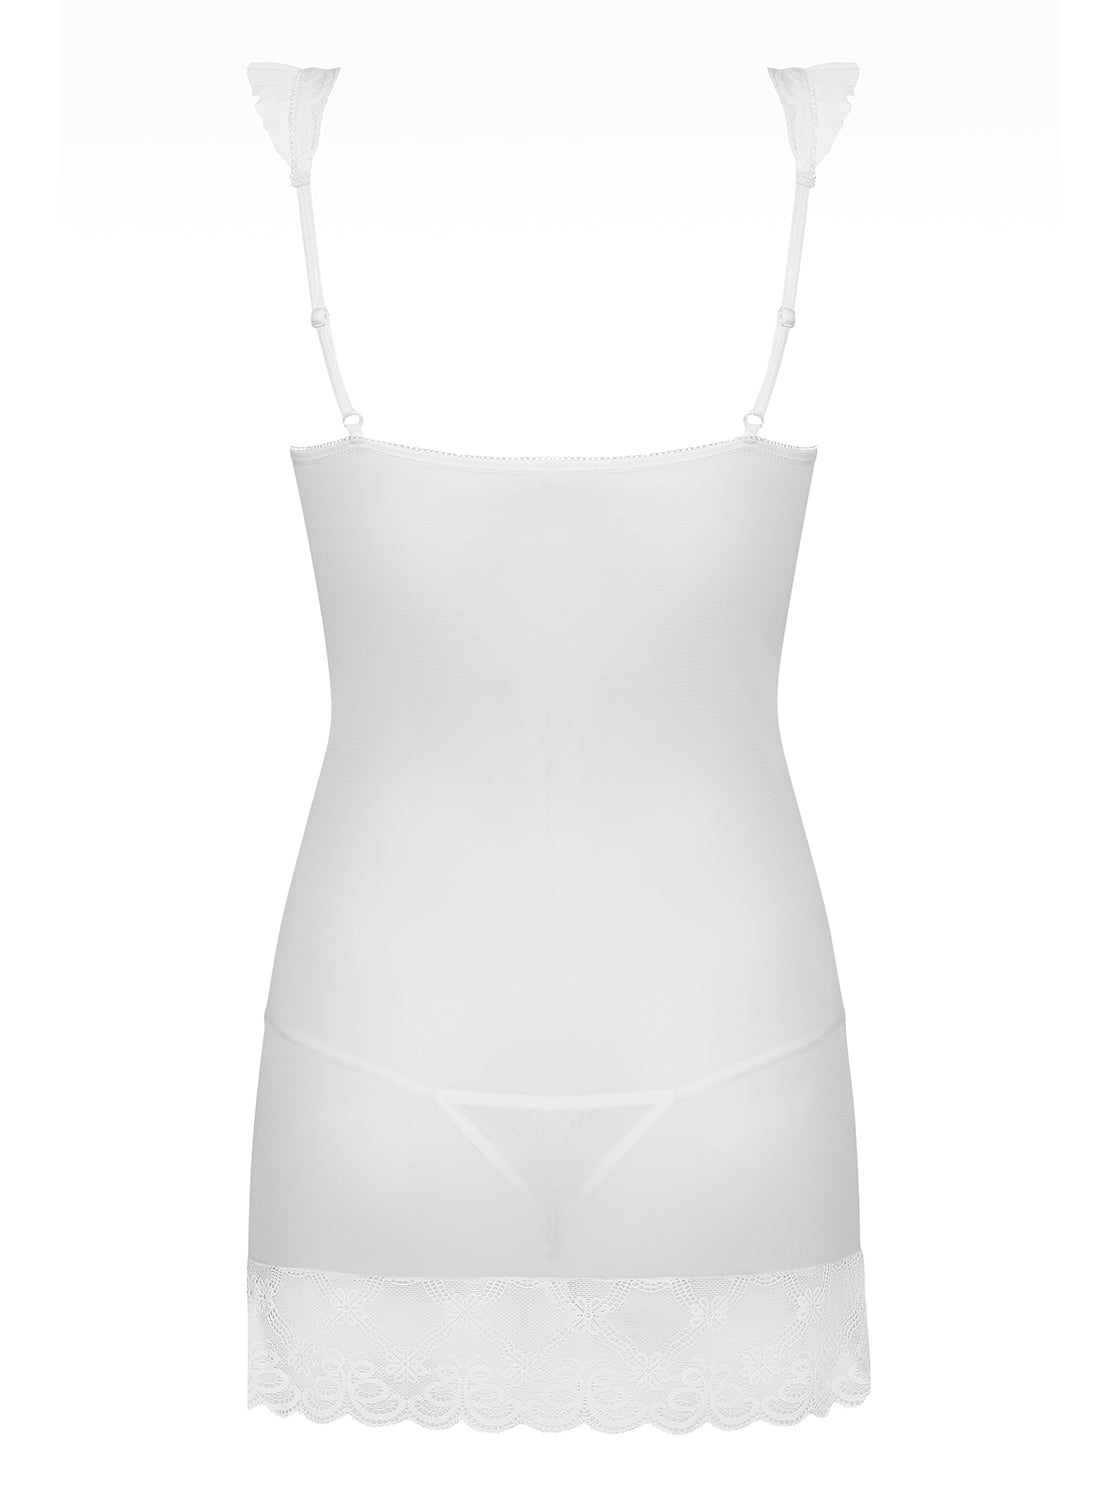 Julitta Delicate White Set Chemise and Thong